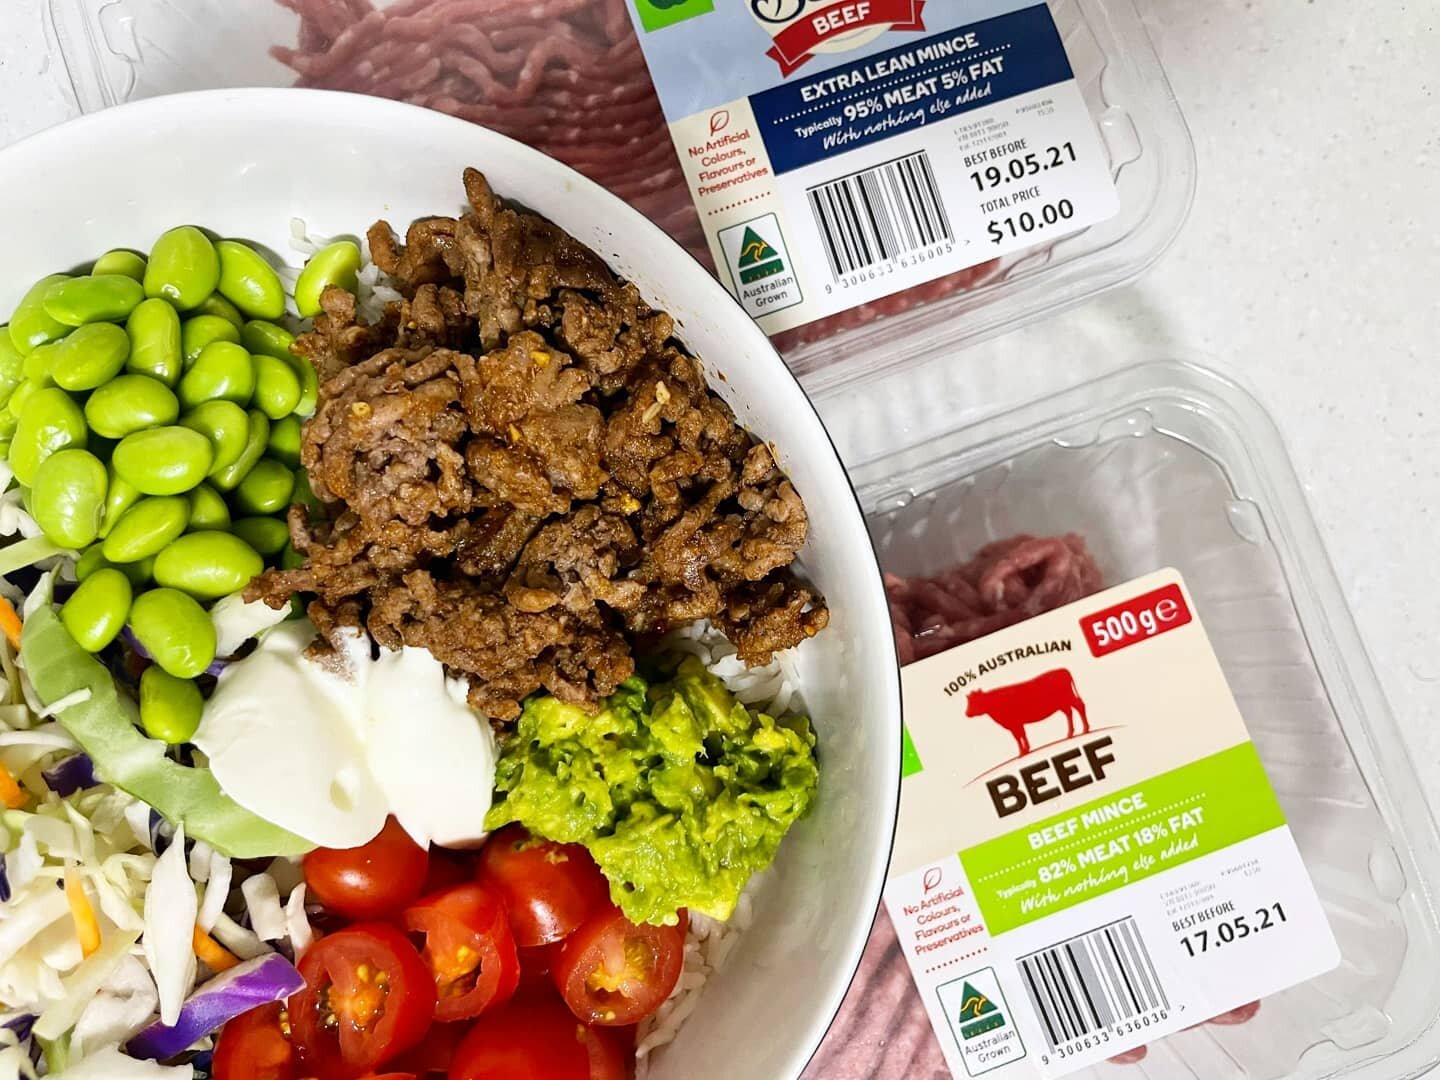 If you've ever visited us here at HM, you know that we always put an emphasis on lean meat! ✔️

Why you may ask? Well when you look at the nutrient information (swipe to see a nutritional breakdown) - it makes a BIG difference! 👀

Lets take beef min